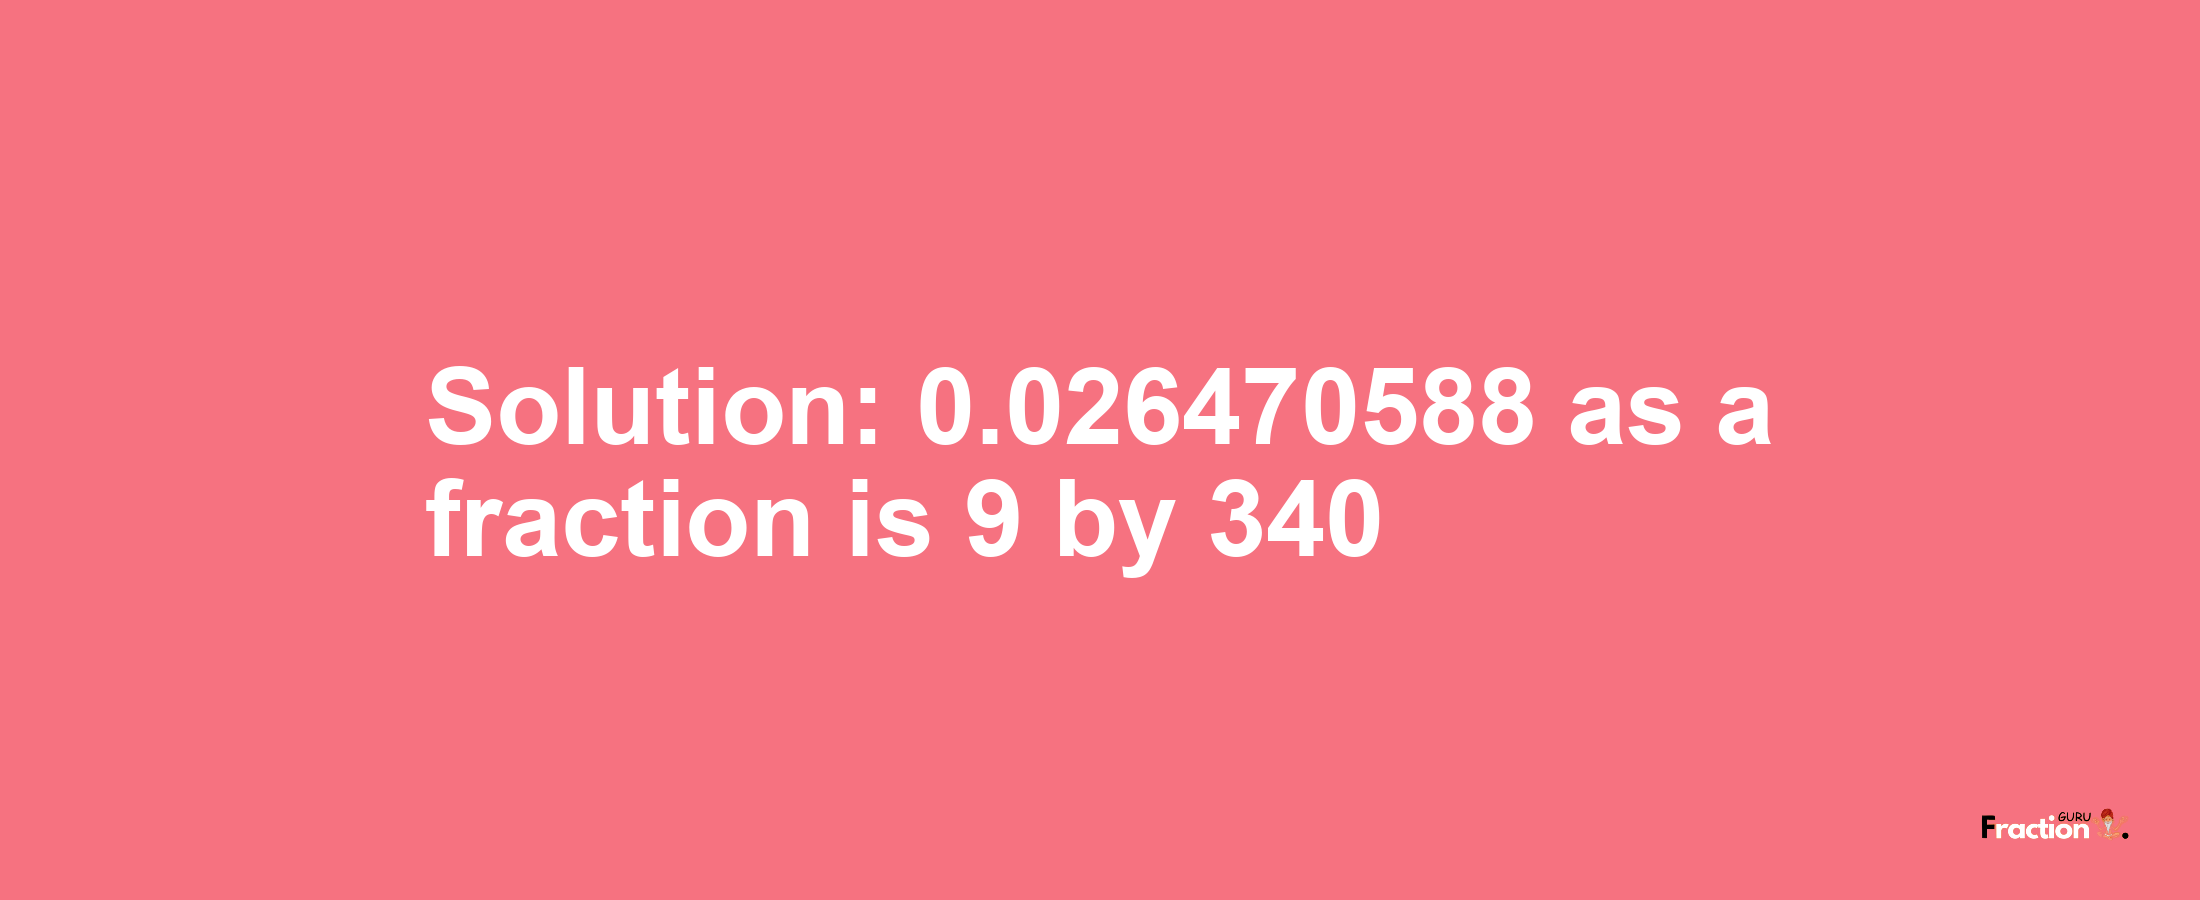 Solution:0.026470588 as a fraction is 9/340